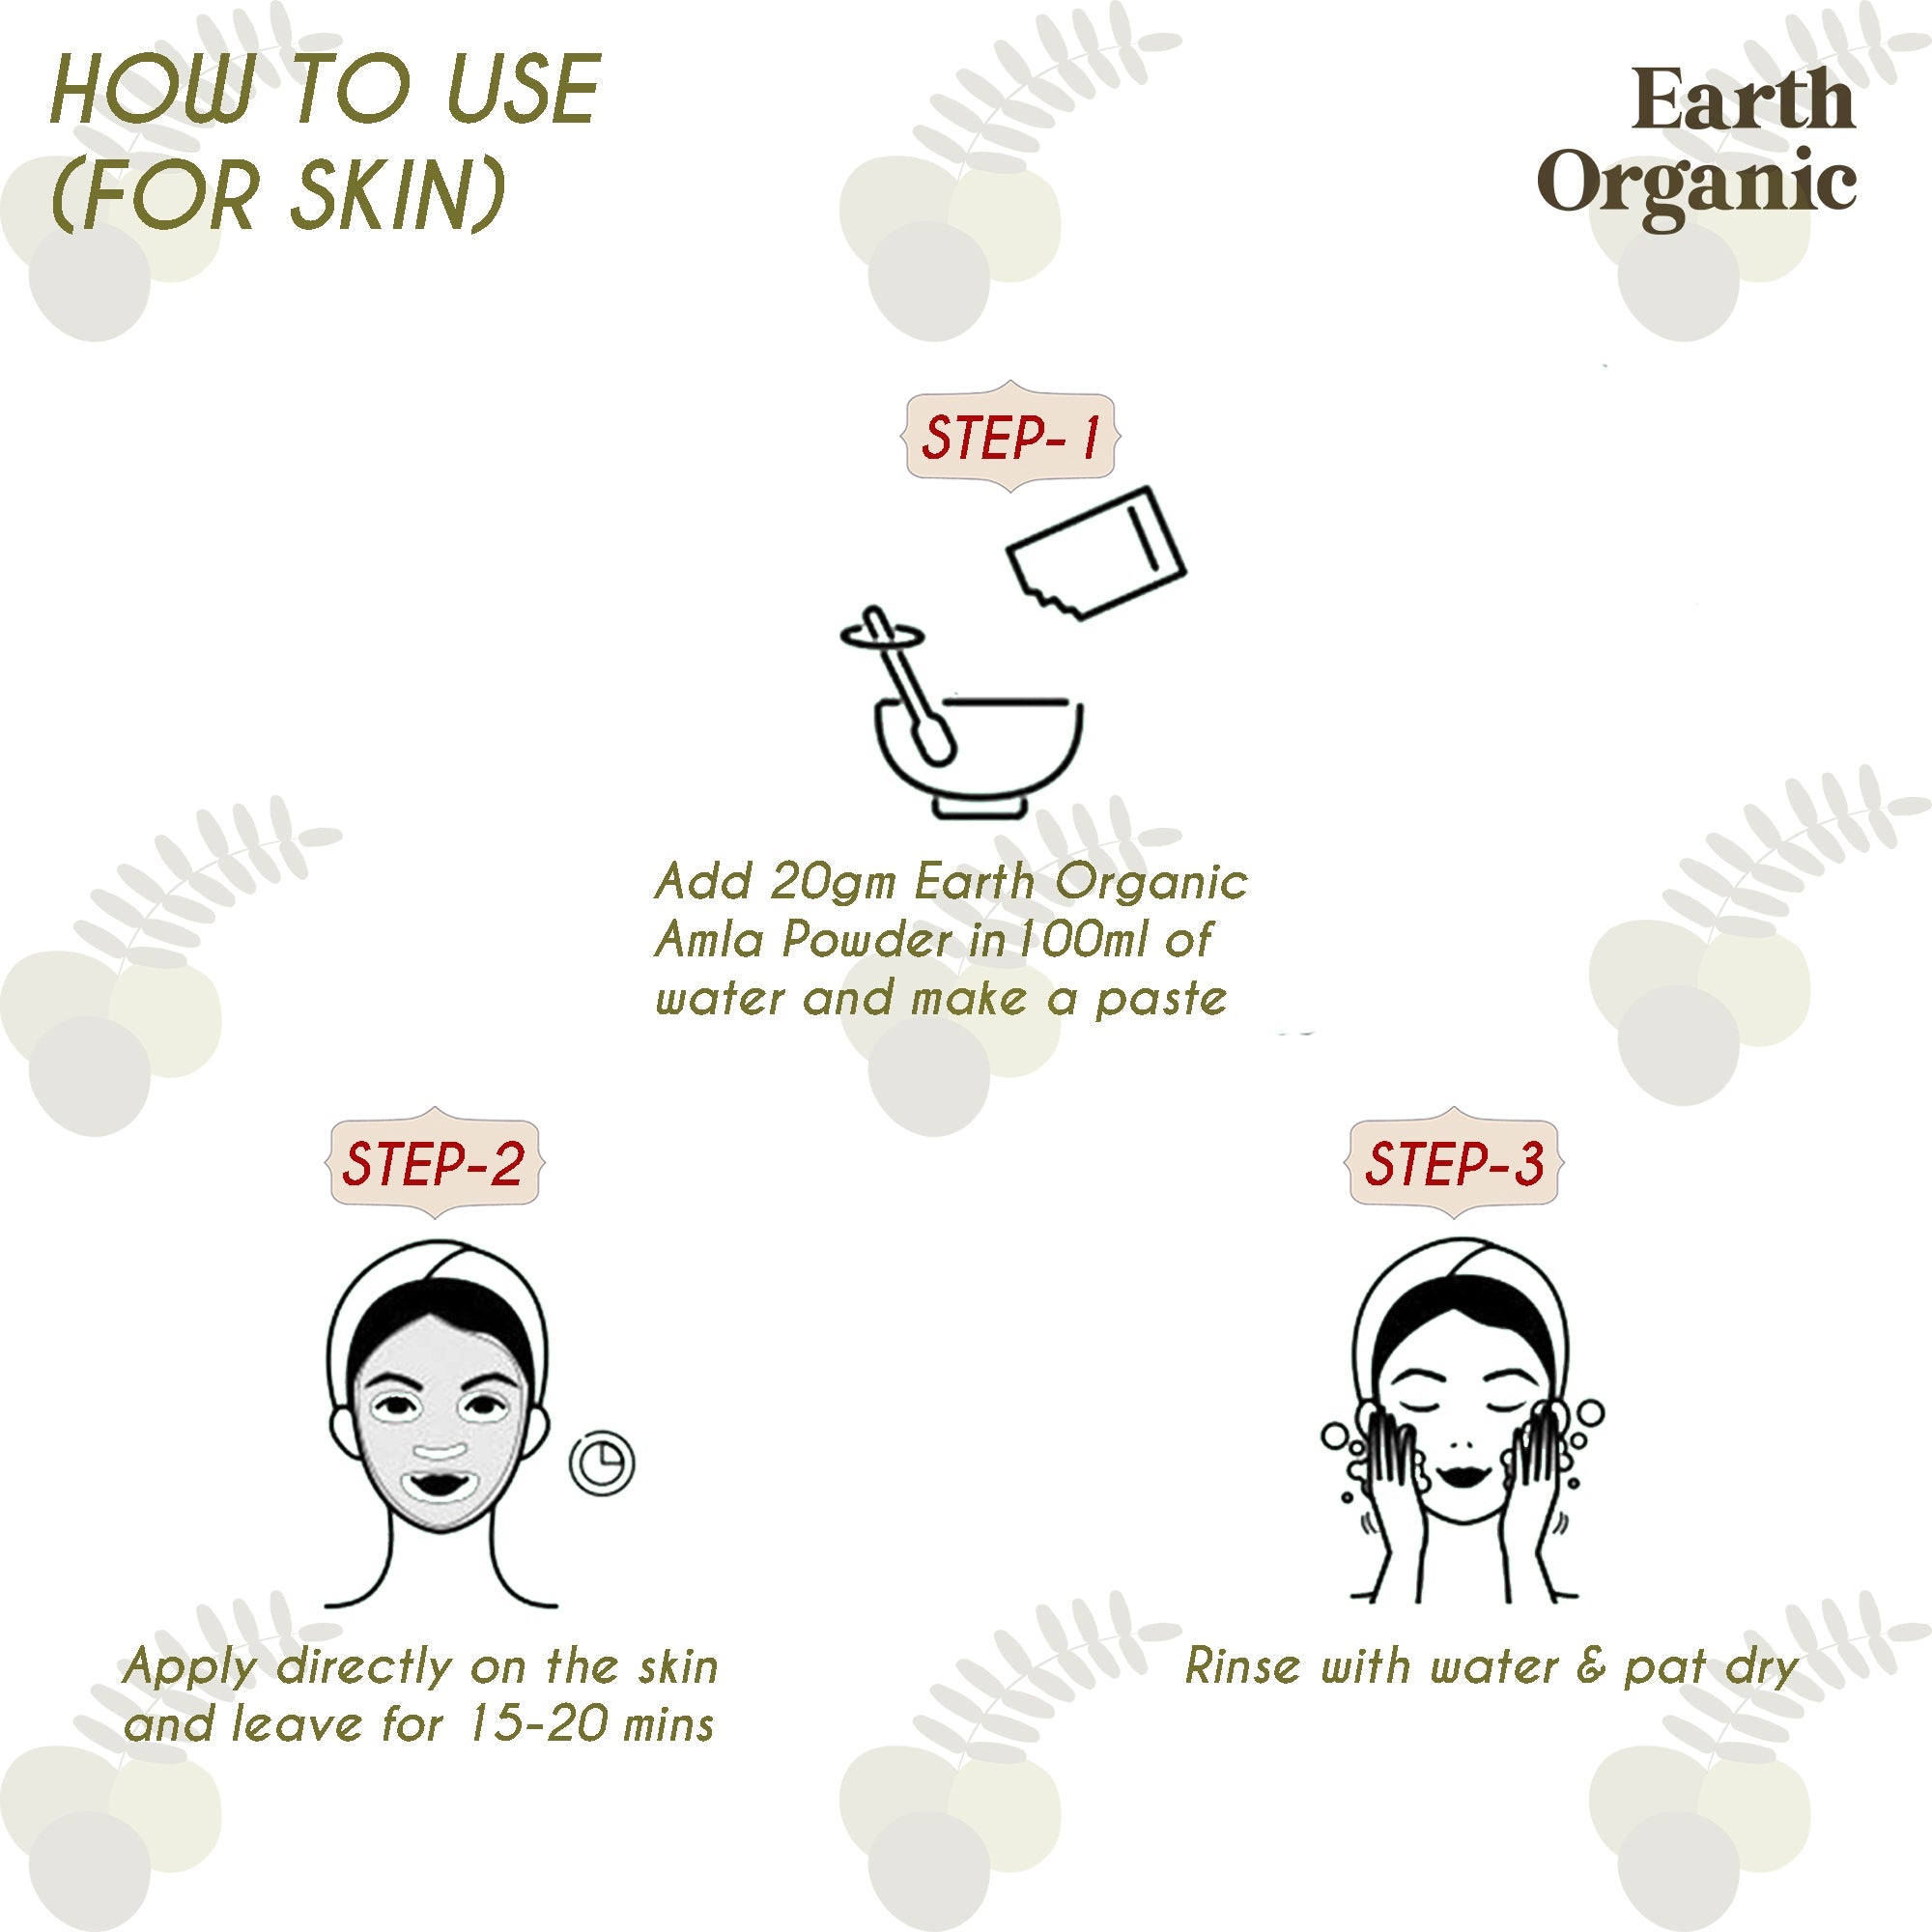 Beneficial for Face, Skin, Hair - The Earth Organic